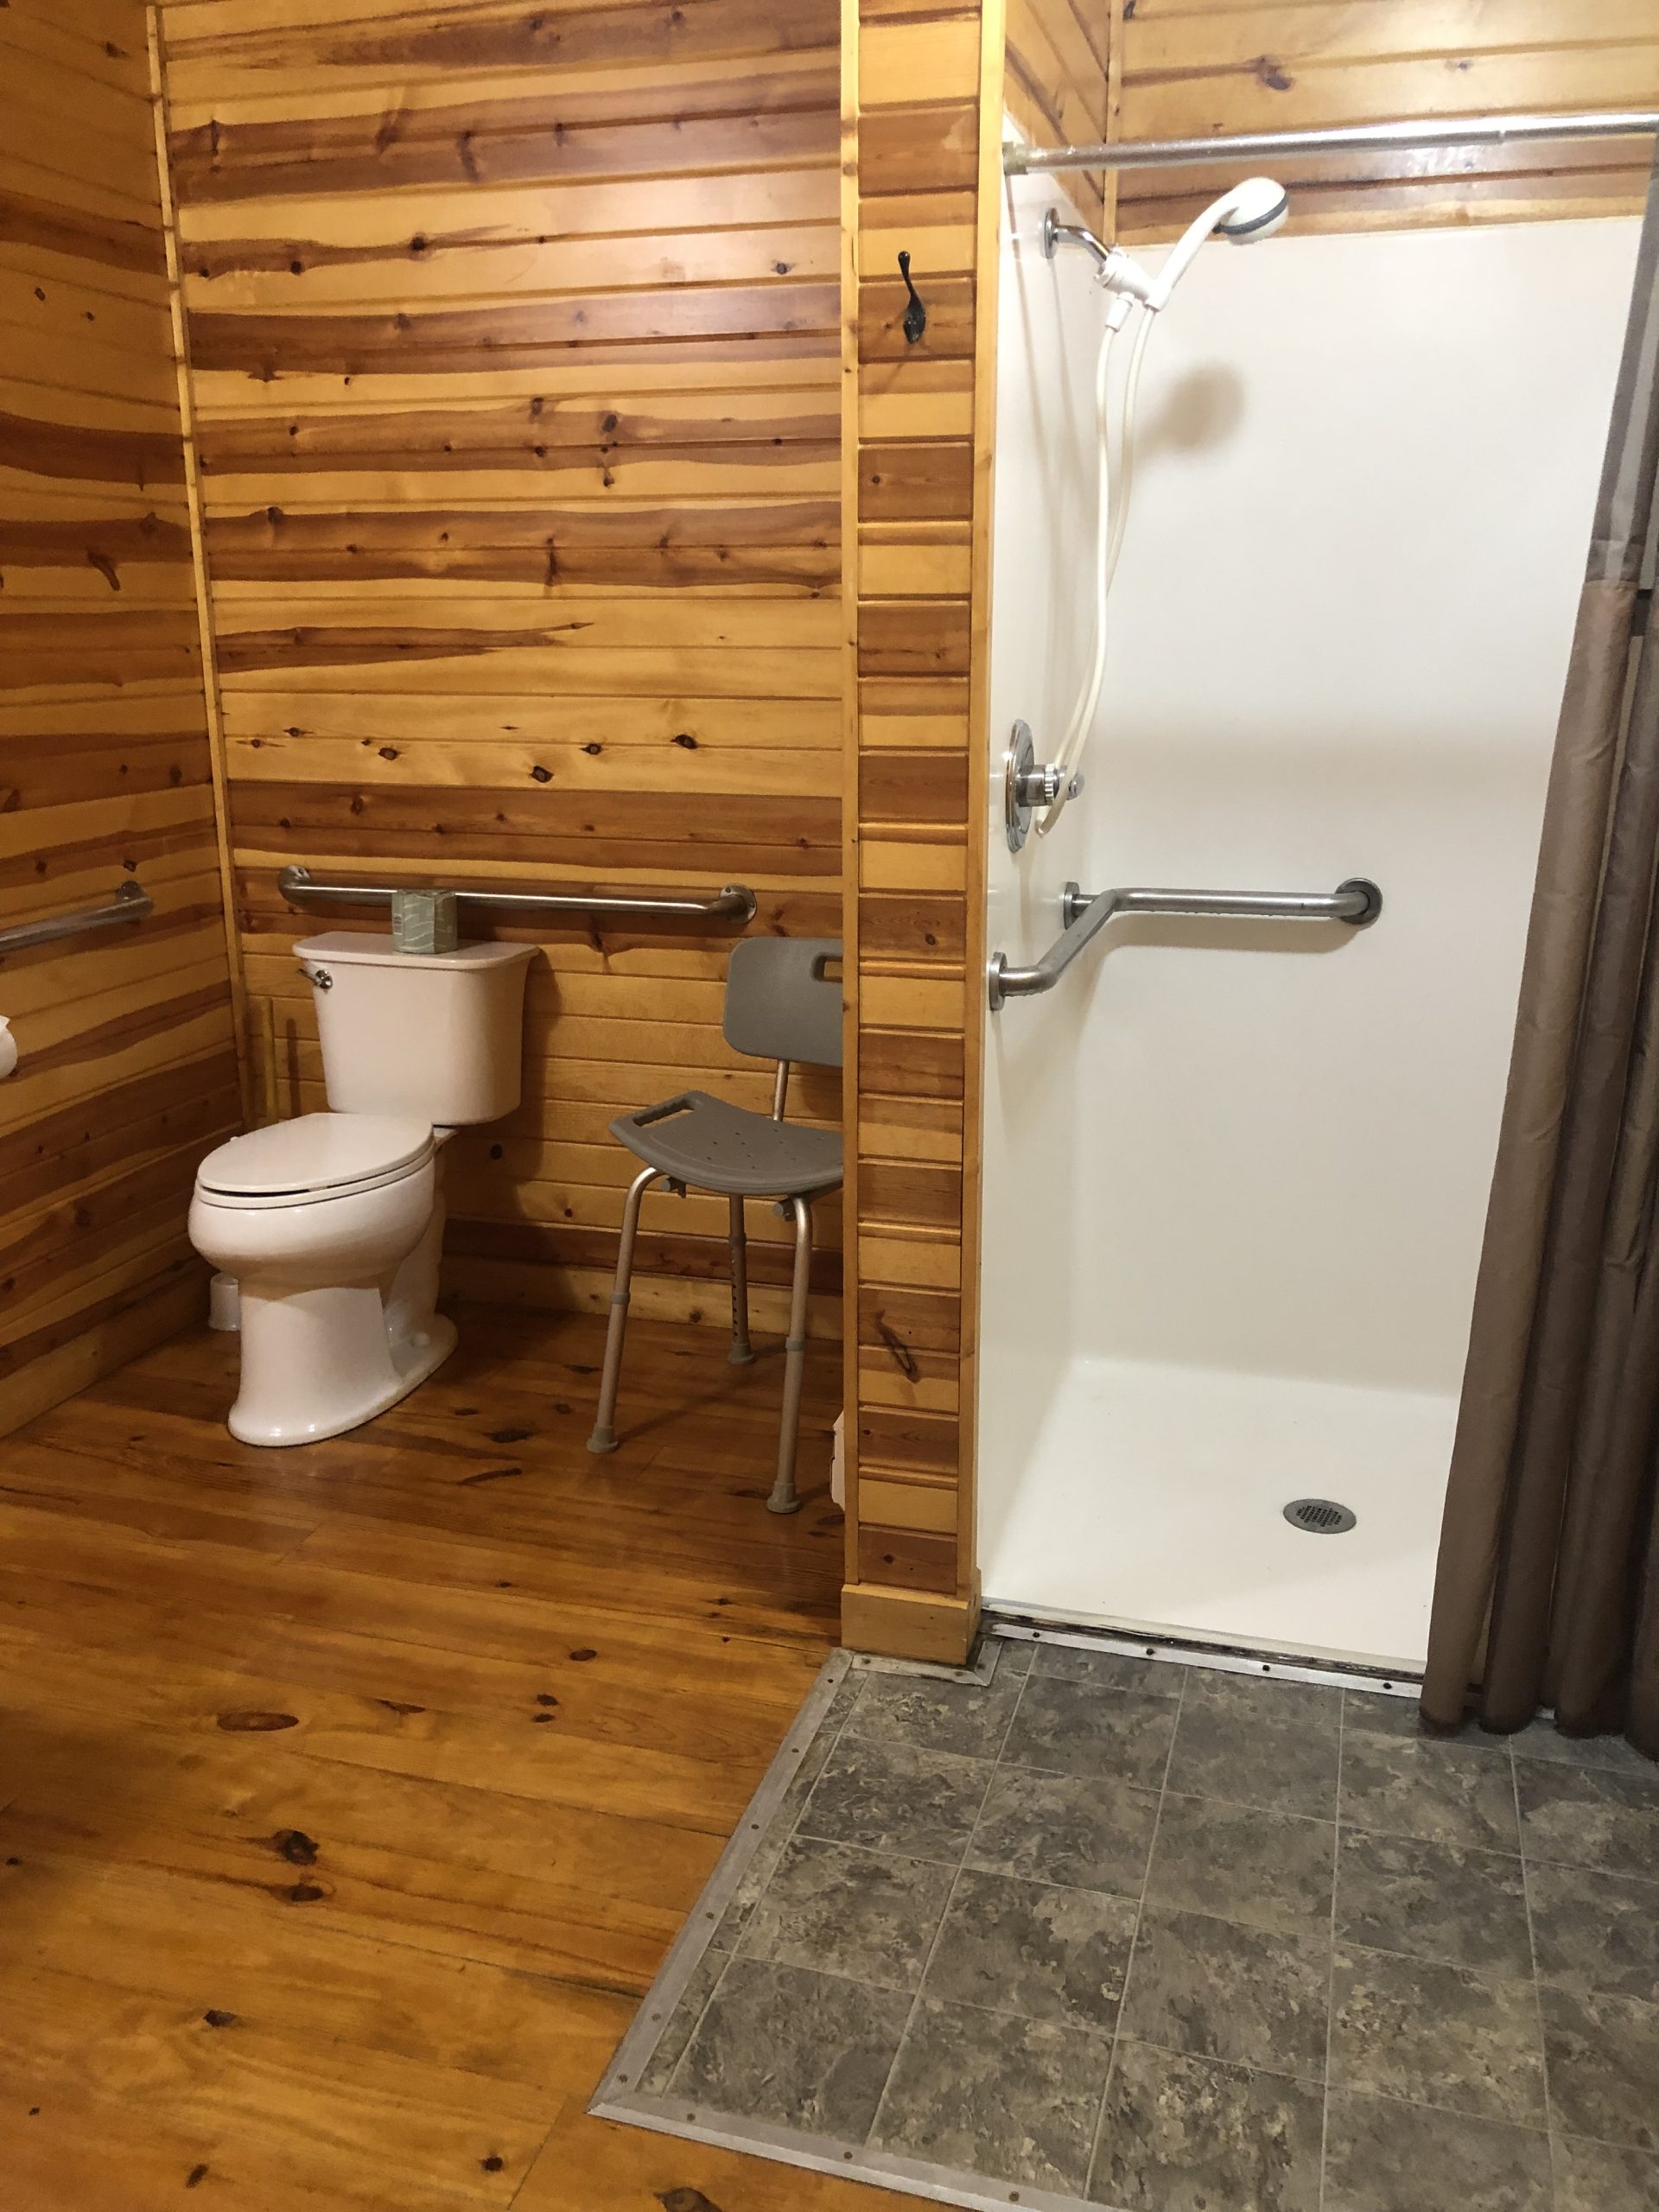 Ionia State Park Cabins - Walleye Large ADA-accessible Bathroom